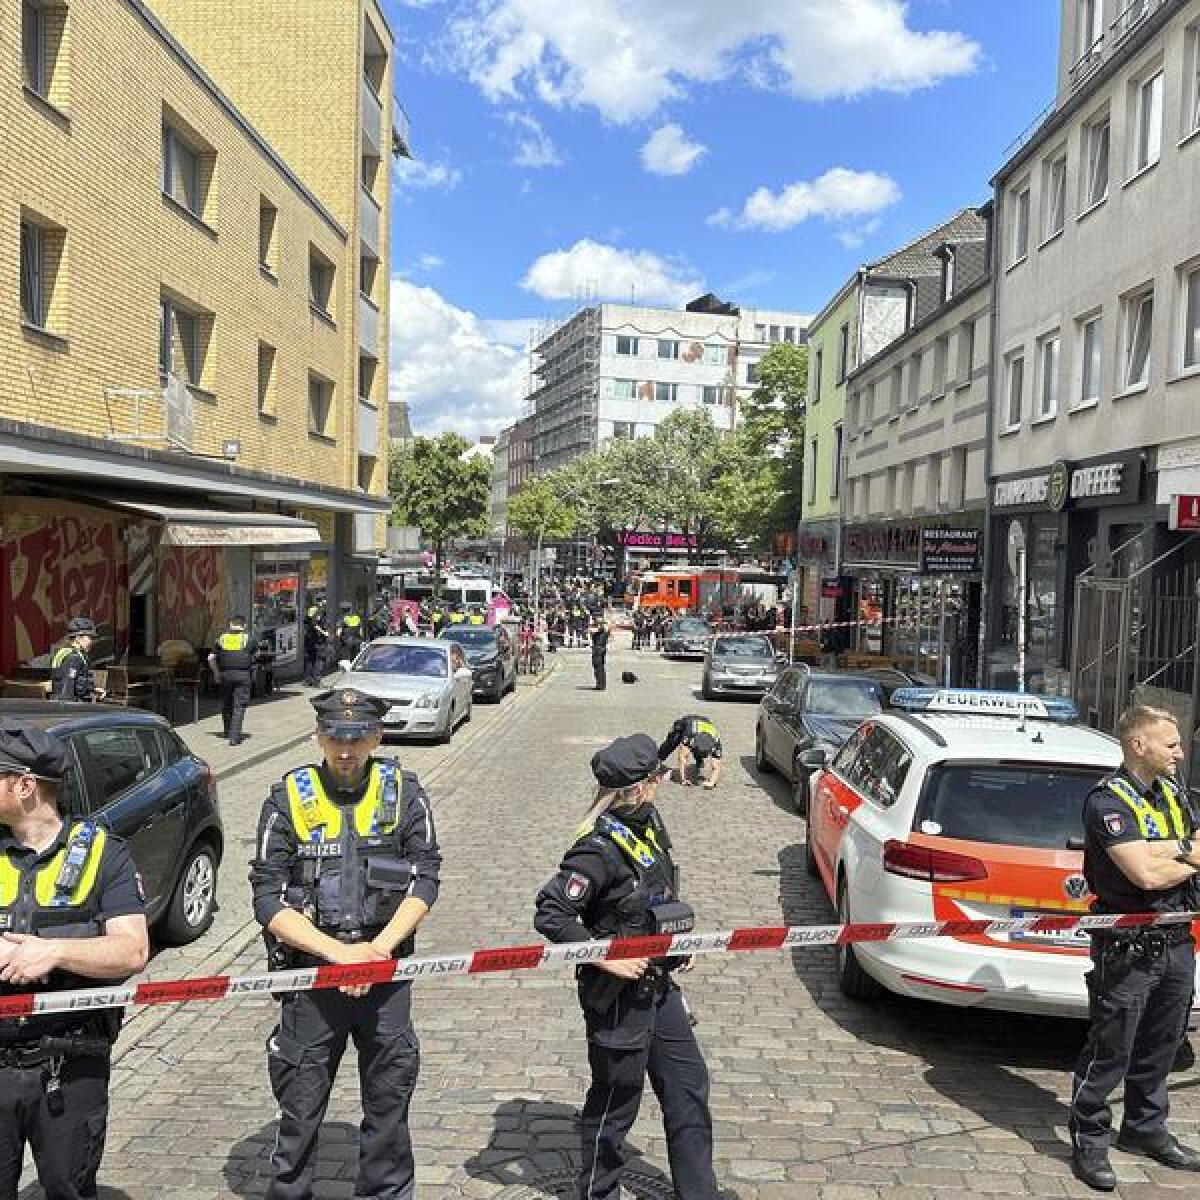 Police standing at the cordoned off area in Hamburg.